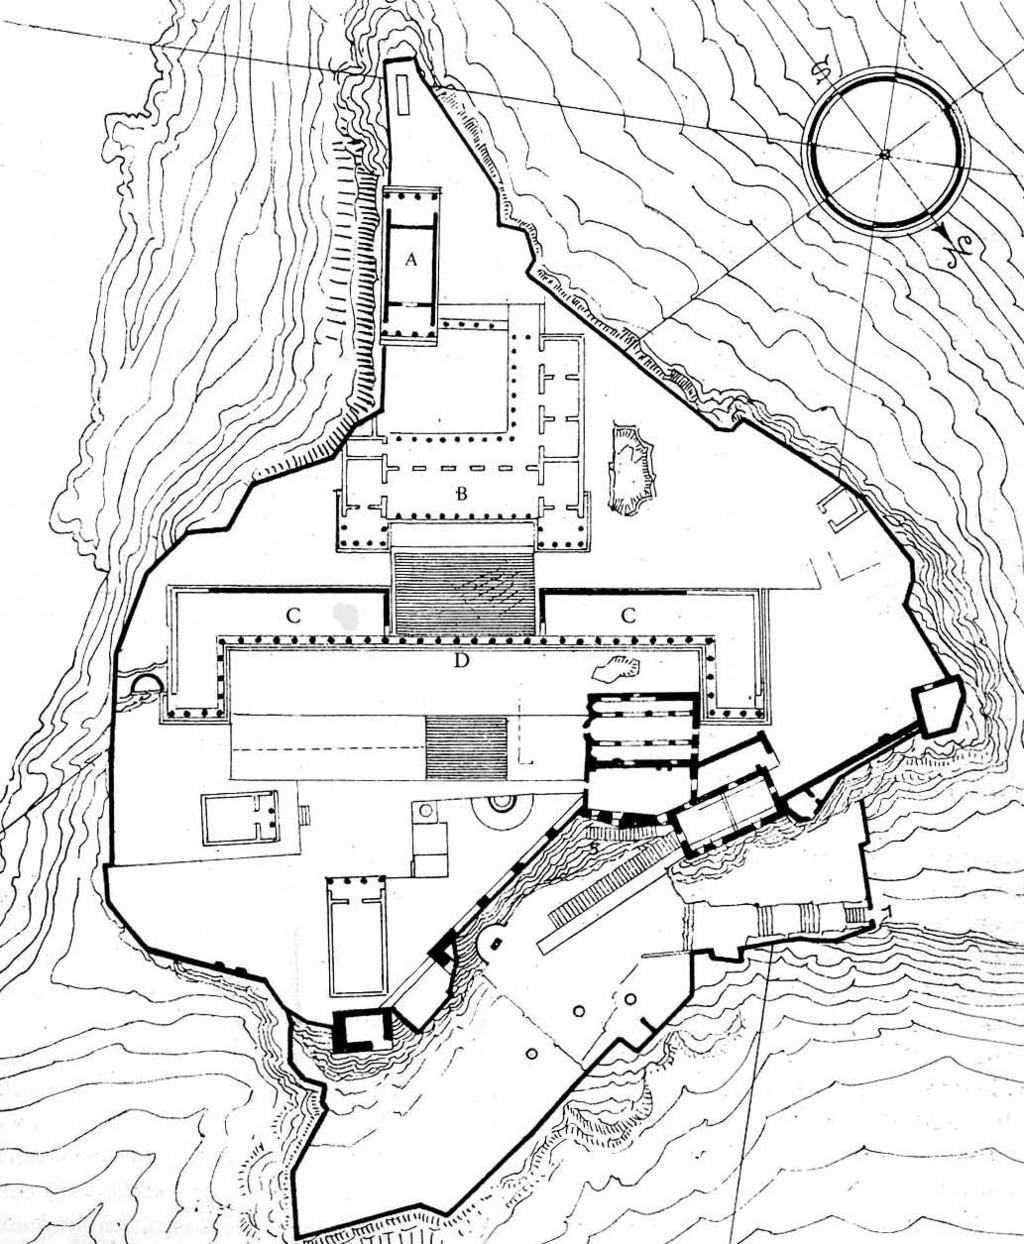 Fig. 14. Lindos, Athenaion. General plan: A. temple; B. upper terrace; C. stoa with paraskenia; D. colonnaded screen and stair to the upper terrace (elaboration by the A. of a drawing by M.